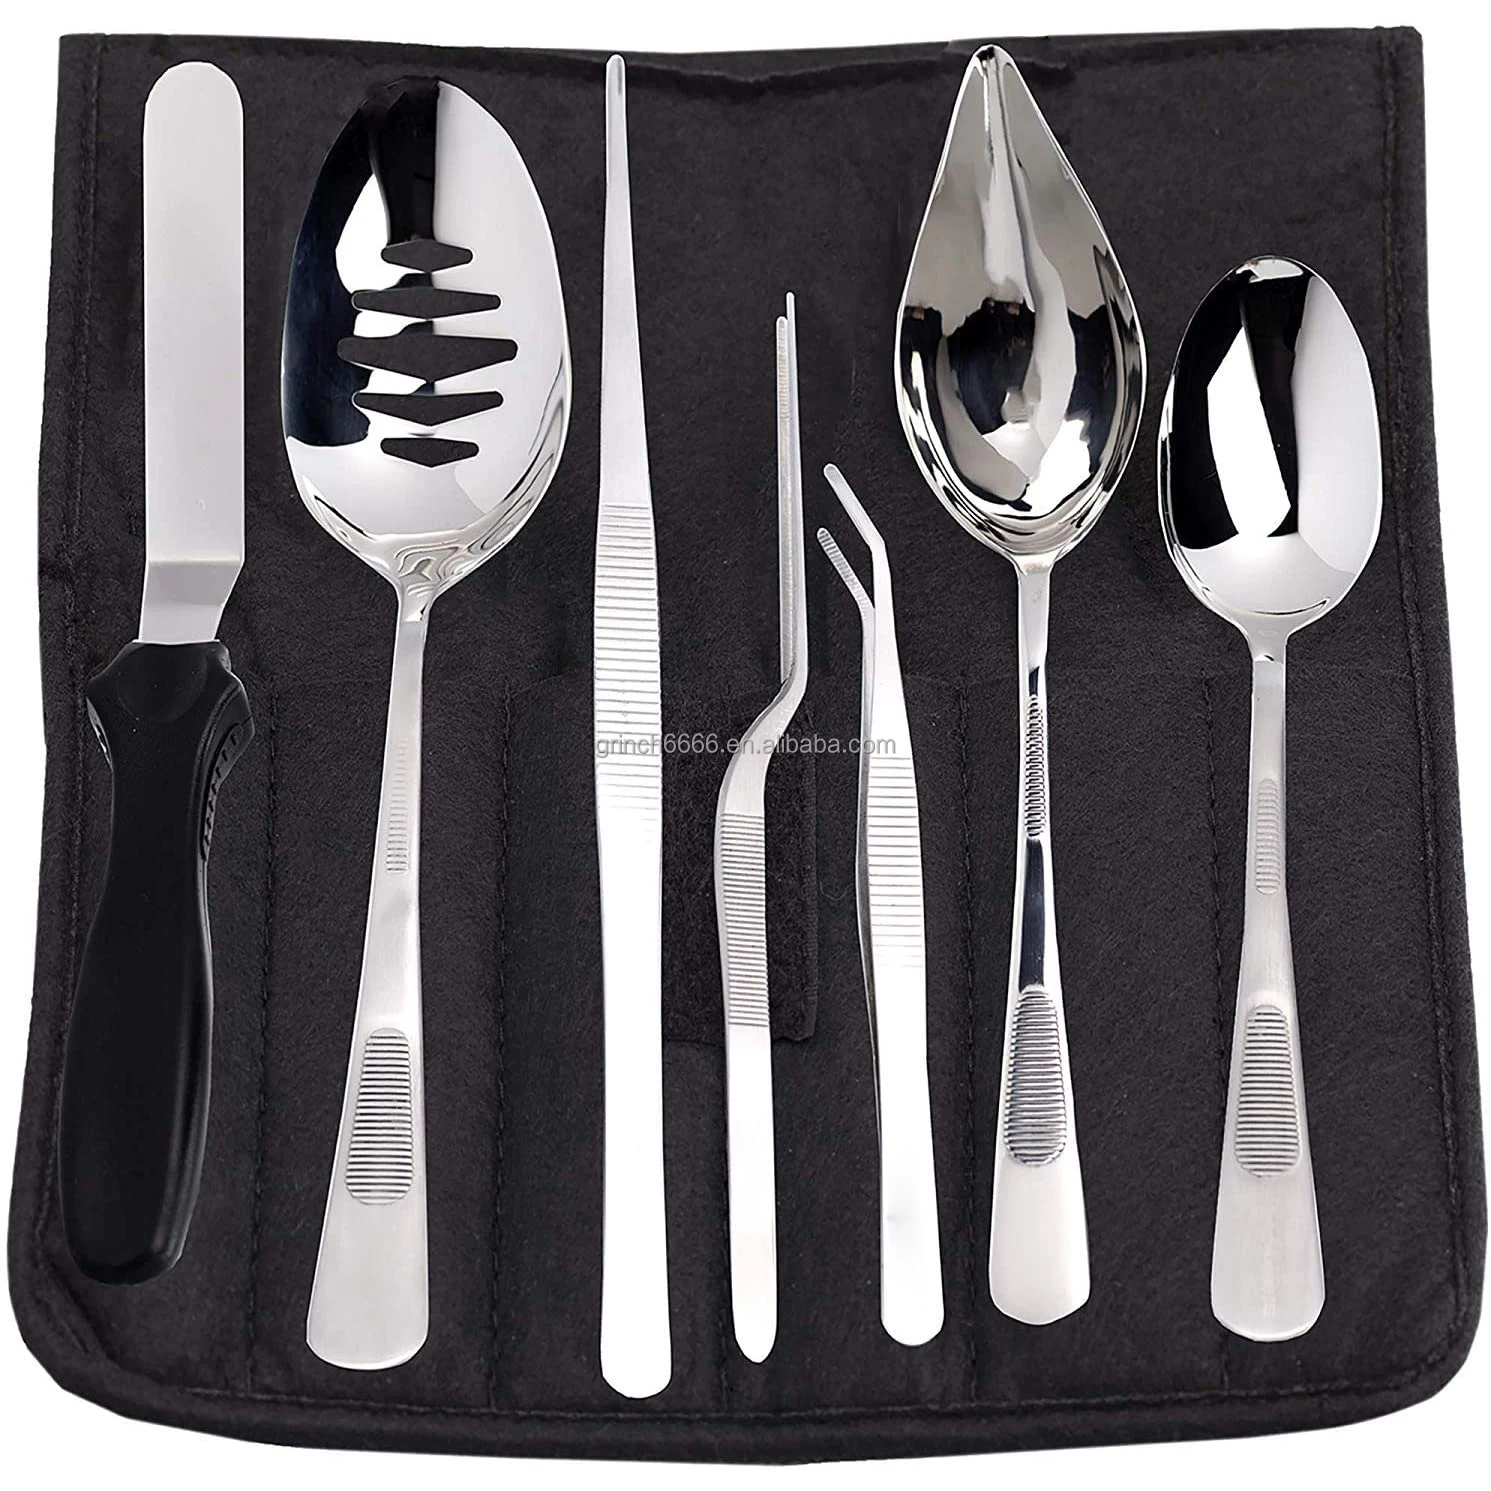  DUEBEL 13 Piece Professional Chef Culinary Plating Kit